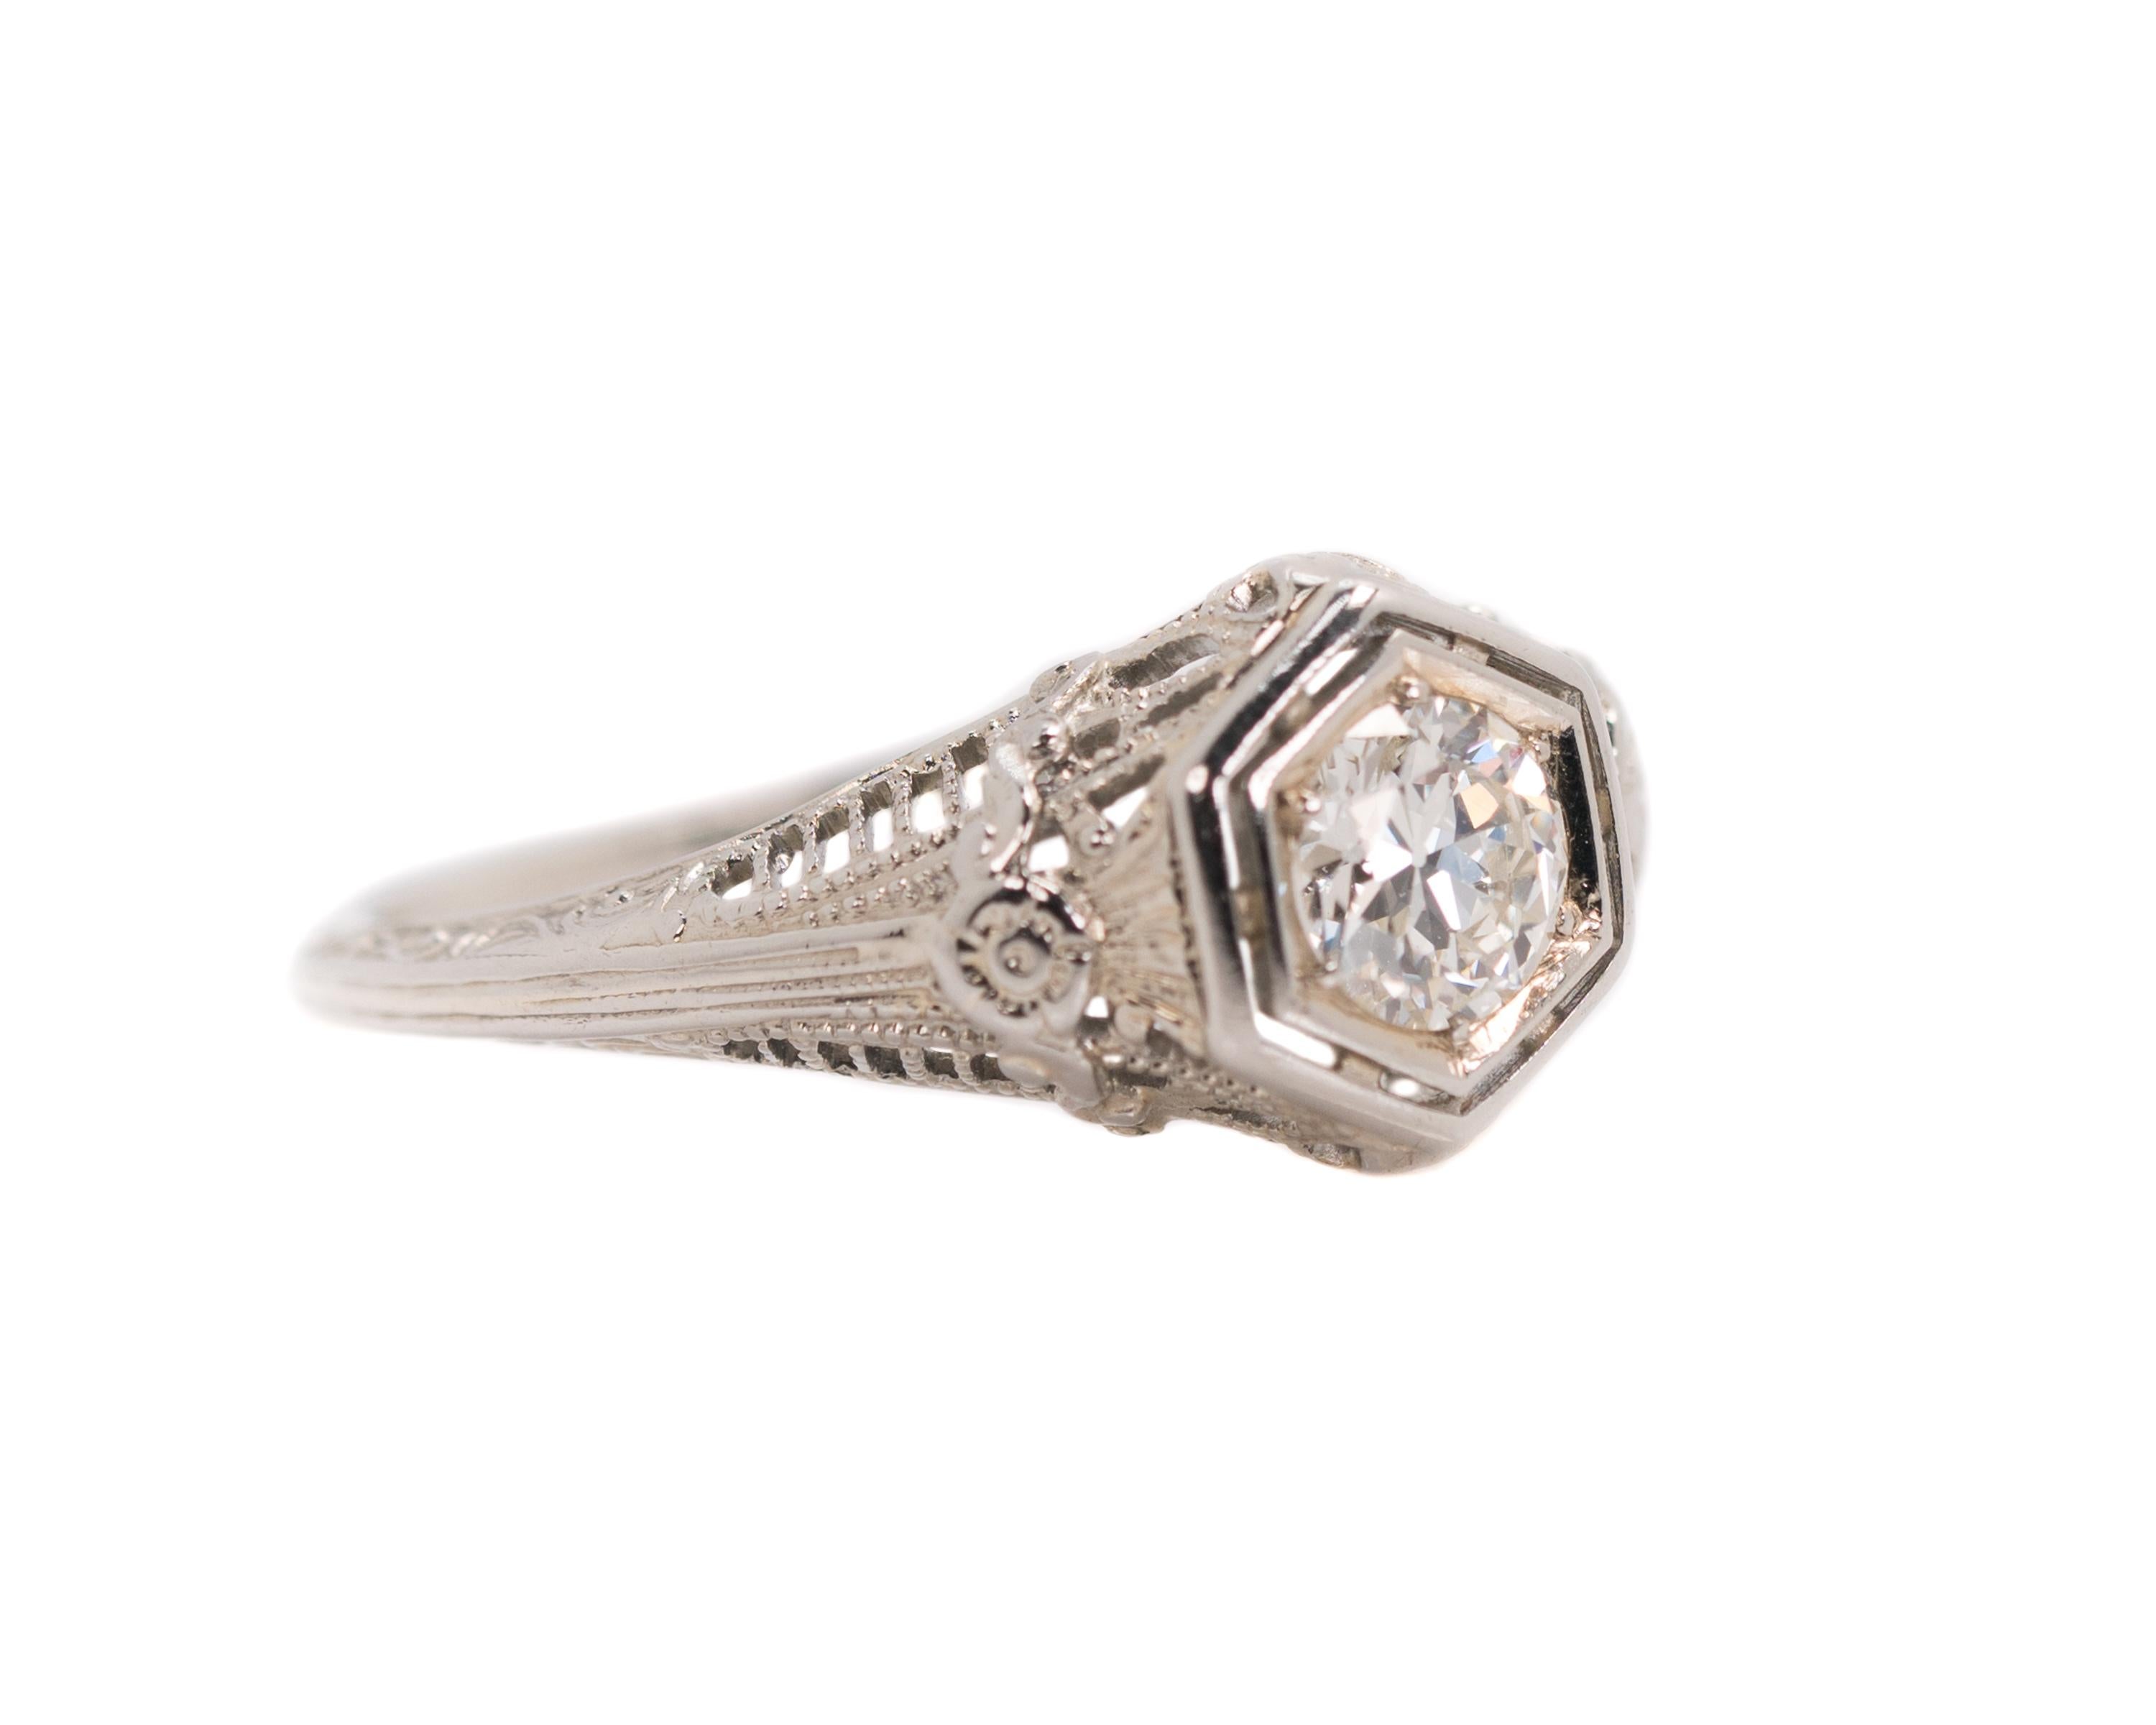 1920s Art Deco Diamond Solitaire Engagement Ring - 18 Karat White Gold, Diamond

Features:
0.50 carat Round Old European Diamond center stone securely set with 6 prongs
18 Karat White Gold Filigree Setting with an open Gallery and shoulders
Double